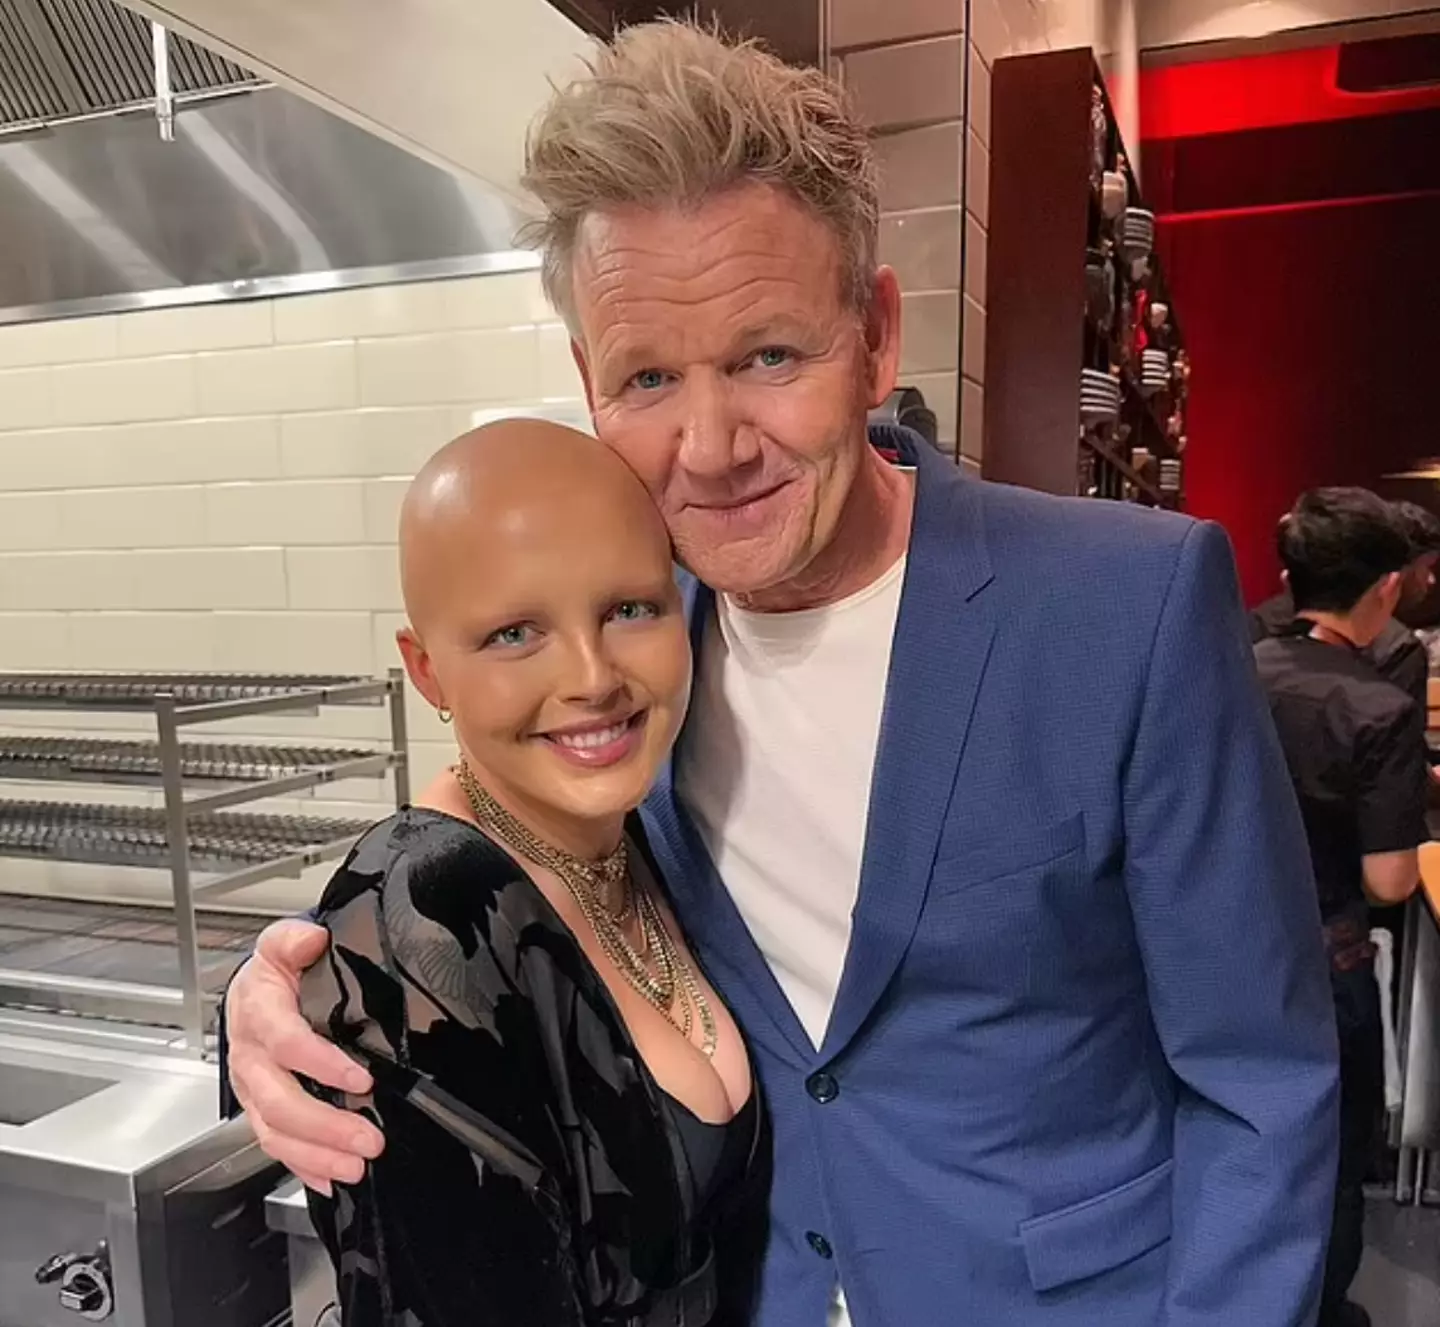 Maddy was able to tick 'meet Gordon Ramsey' off her bucket list before she died. (Instagram/fruitsnackmaddy)